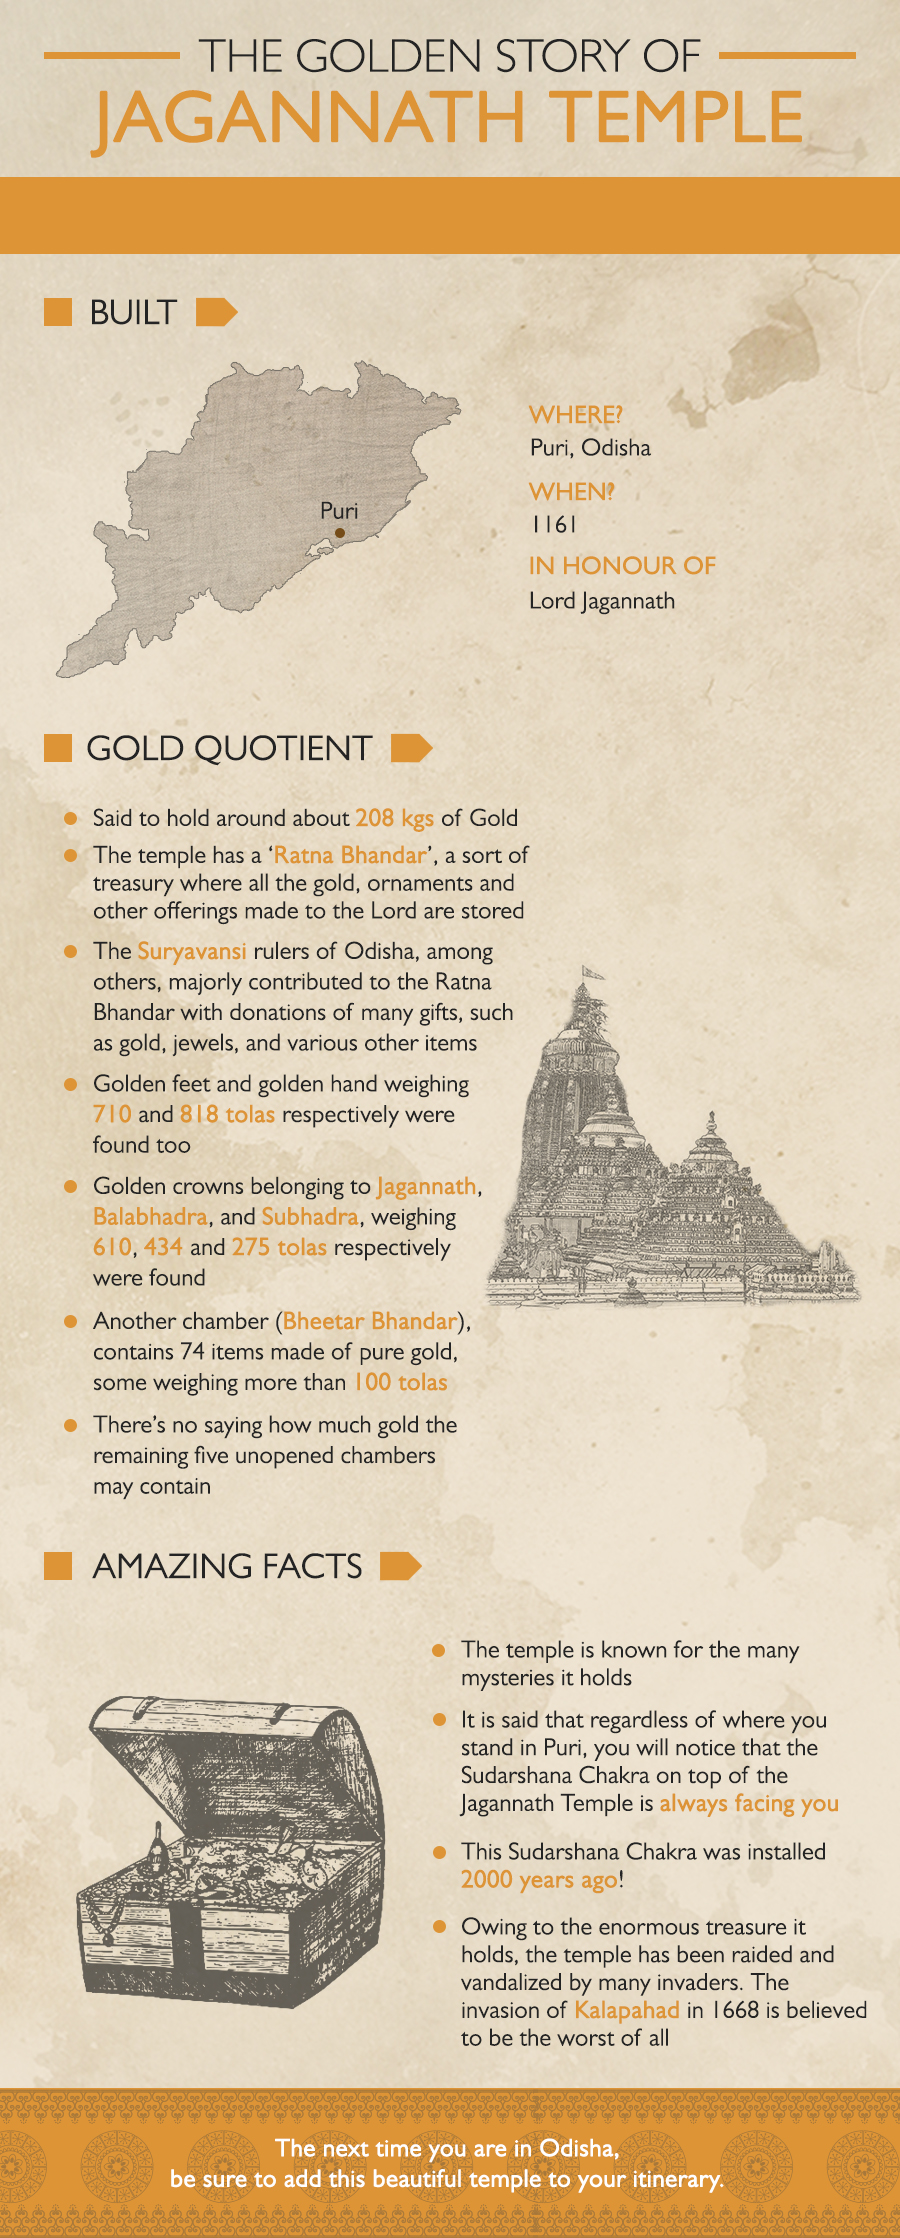 Holding 208 Kgs of gold and an unknown amount in its 5 unopened chambers, no one actually knows actual gold holdings of Jagannath Temple. Know more about this world famous temple located in Puri, Odisha.